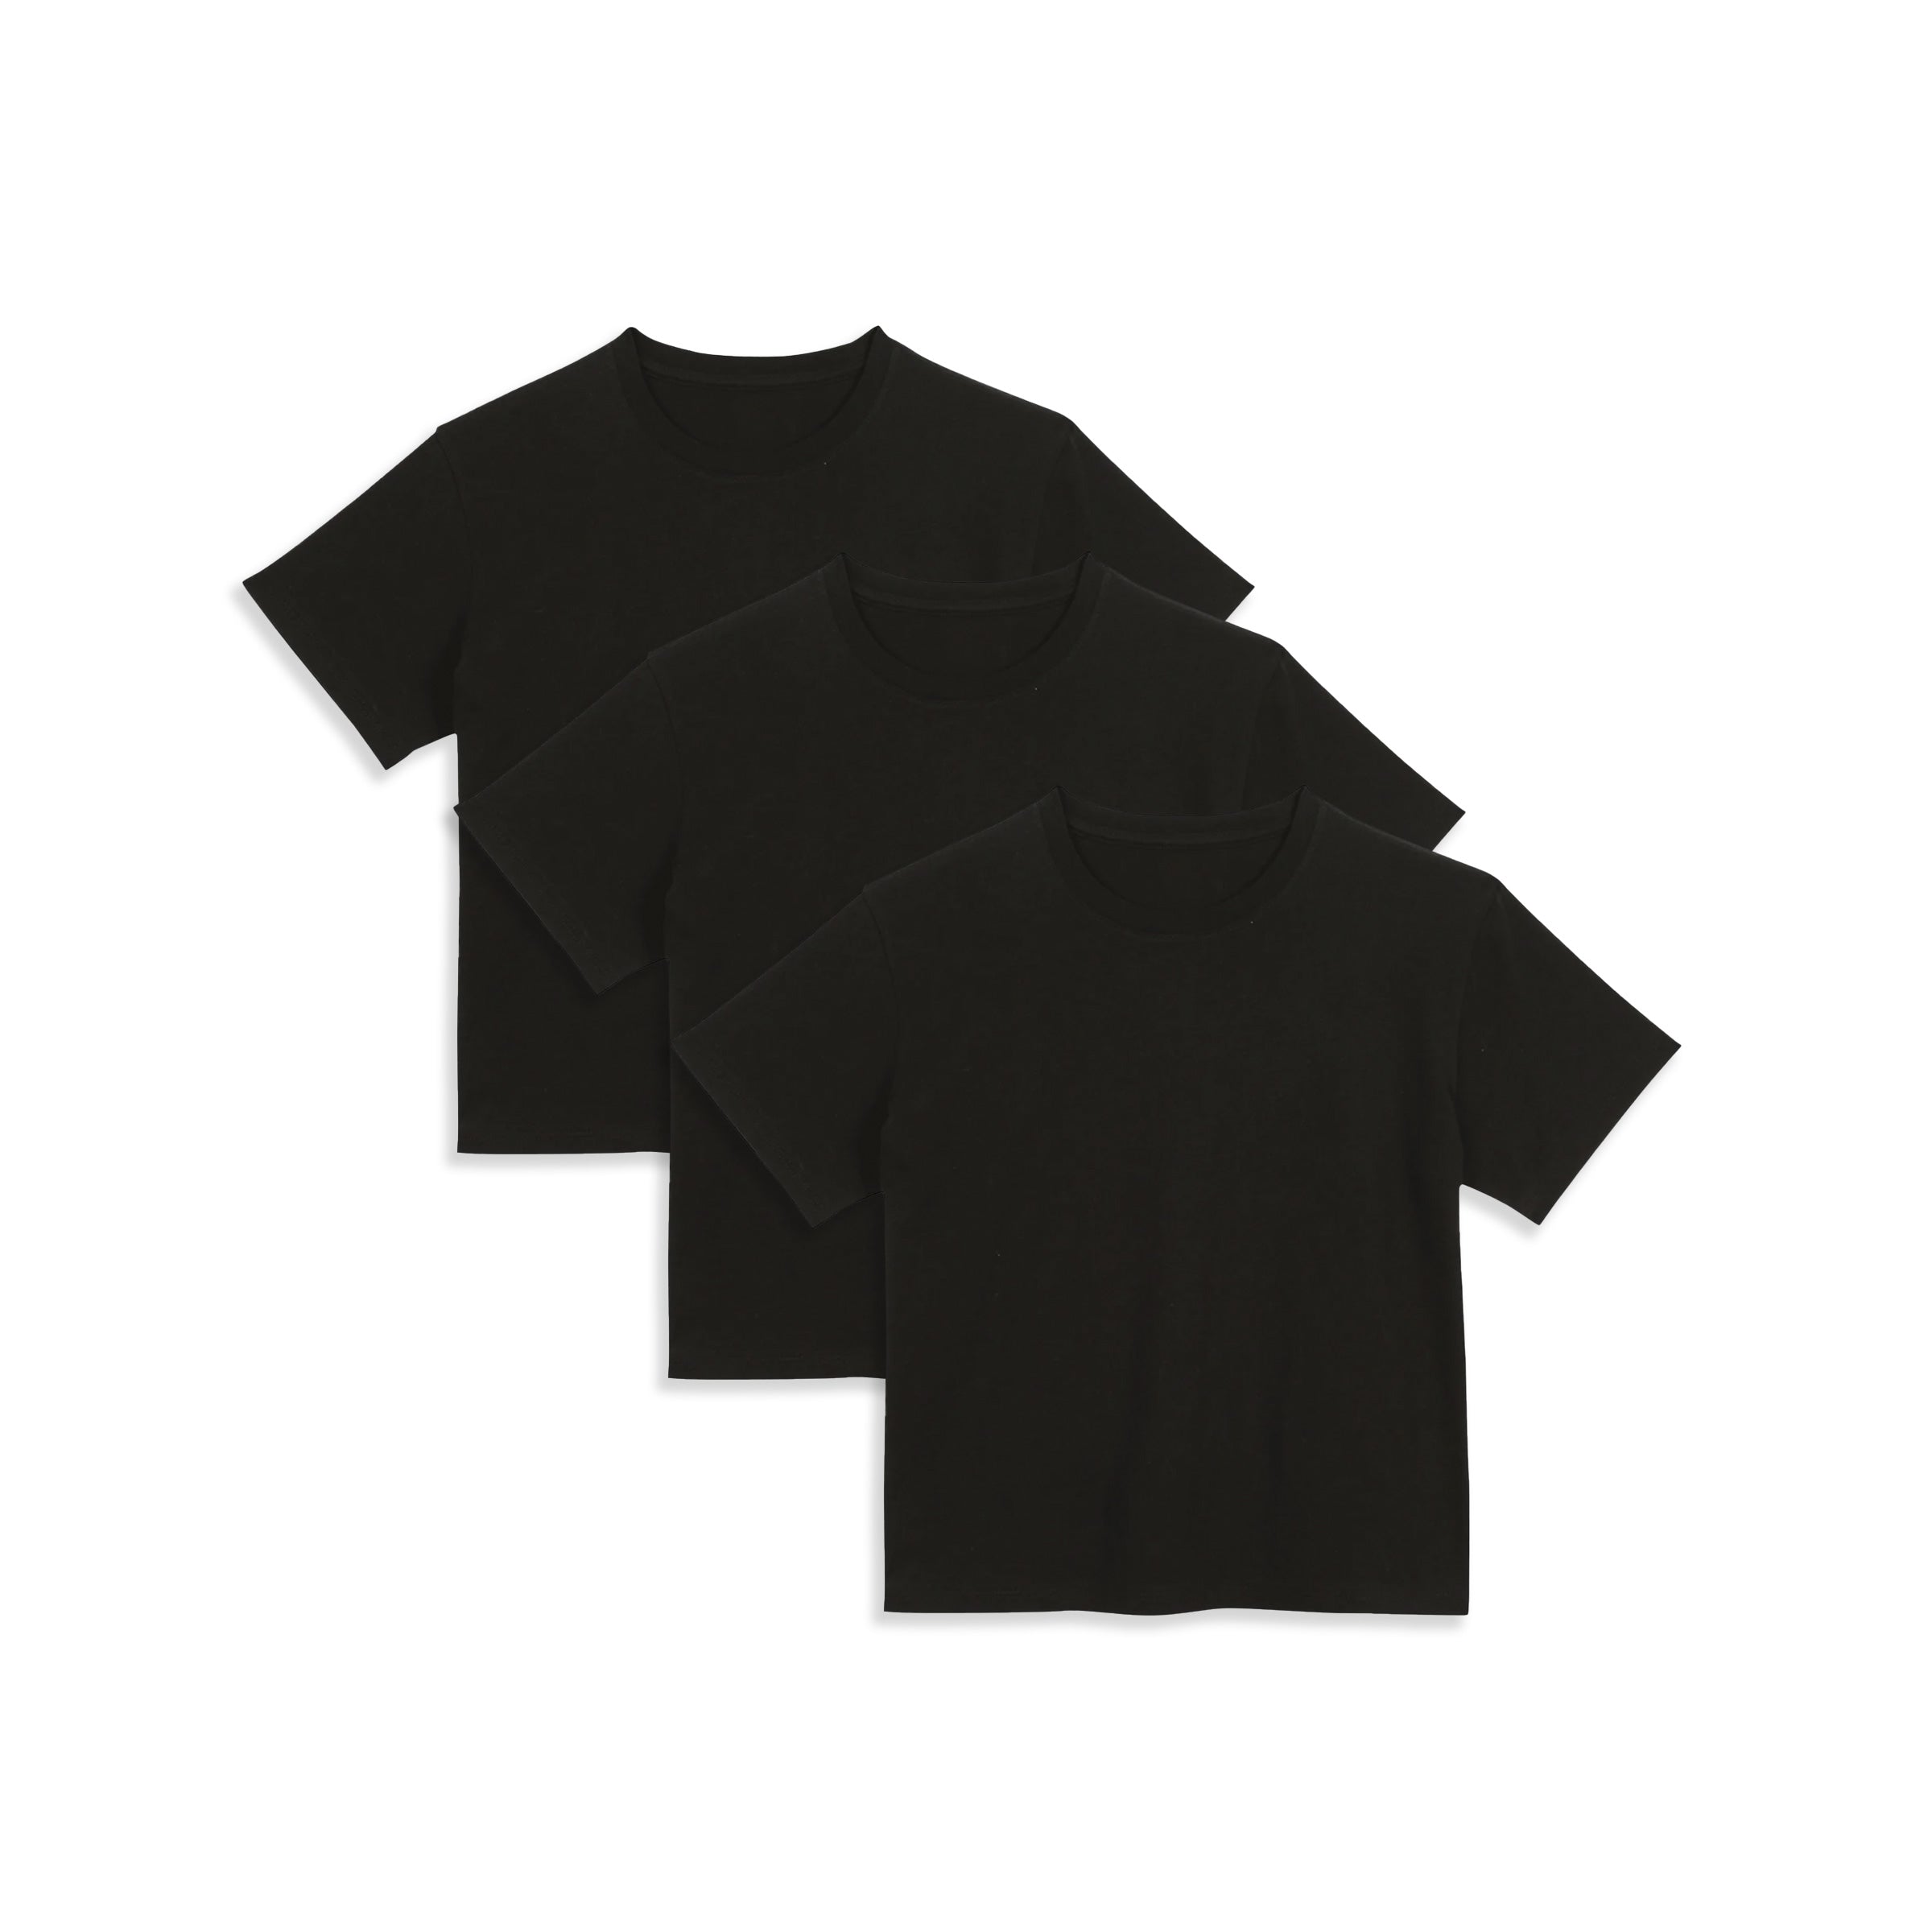 Women wearing Black The Cotton Boxy Crew Tee 3-Pack tees